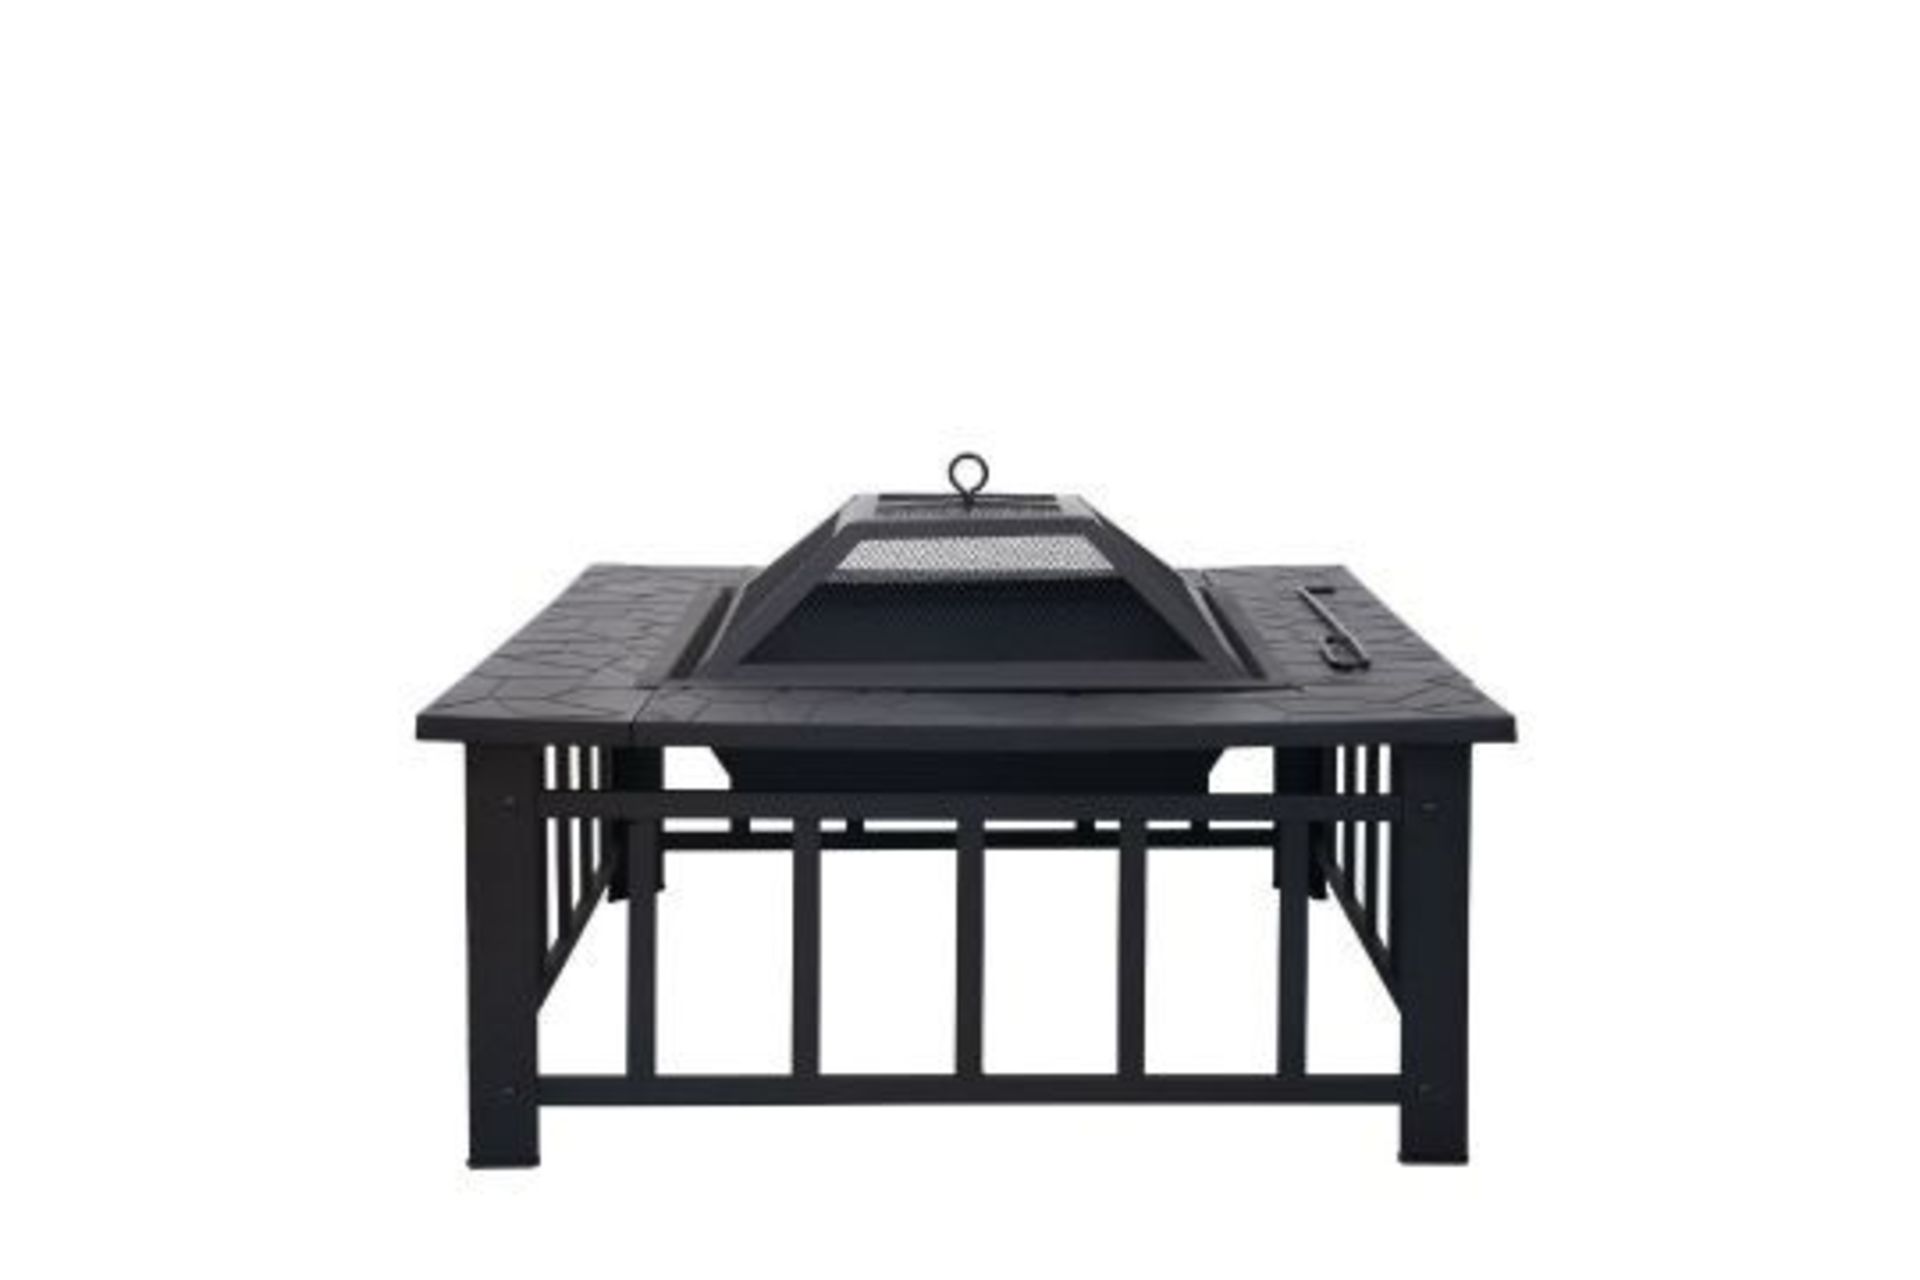 New Boxed Outdoor 3 in 1 BBQ, Large Firepit, Ice Bucket & Garden Square Table. RRP £249.99. Planning - Image 2 of 3